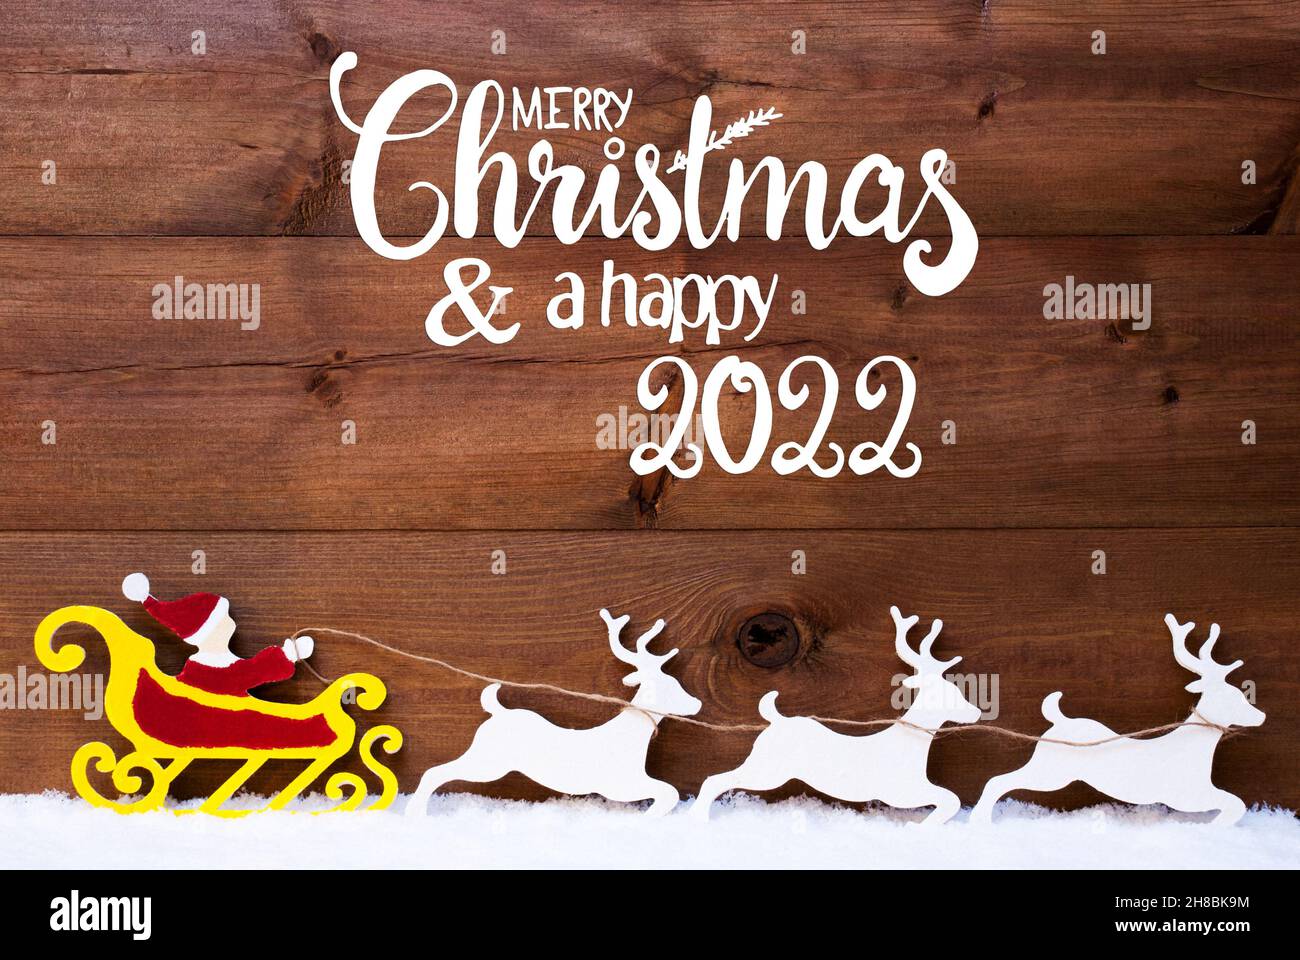 Ornament, Snow, Sleigh, Reindeers, Satna, Merry Christmas And Happy 2022 Stock Photo